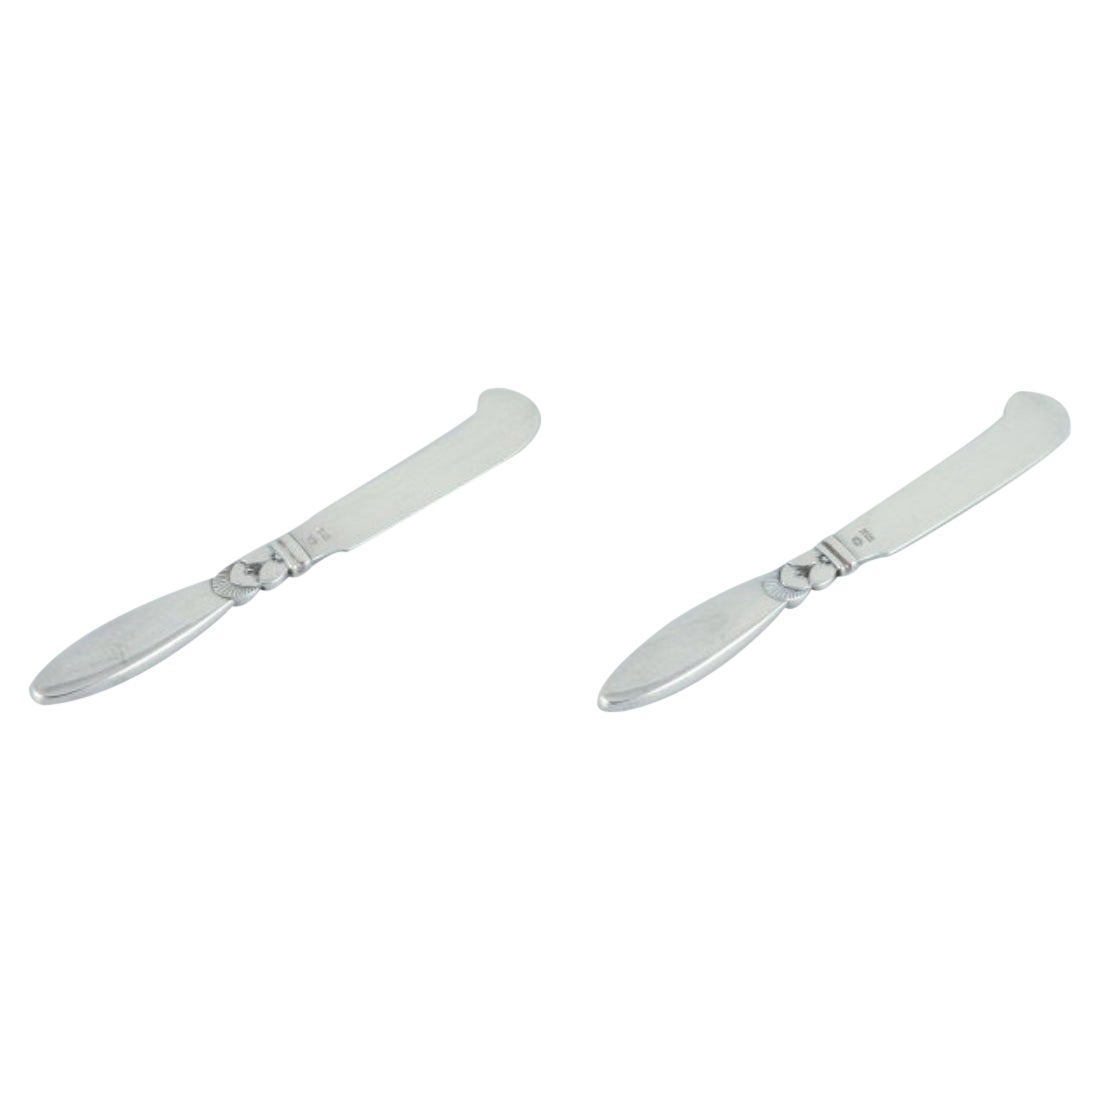 Georg Jensen Cactus. Two all-silver butter knives. 